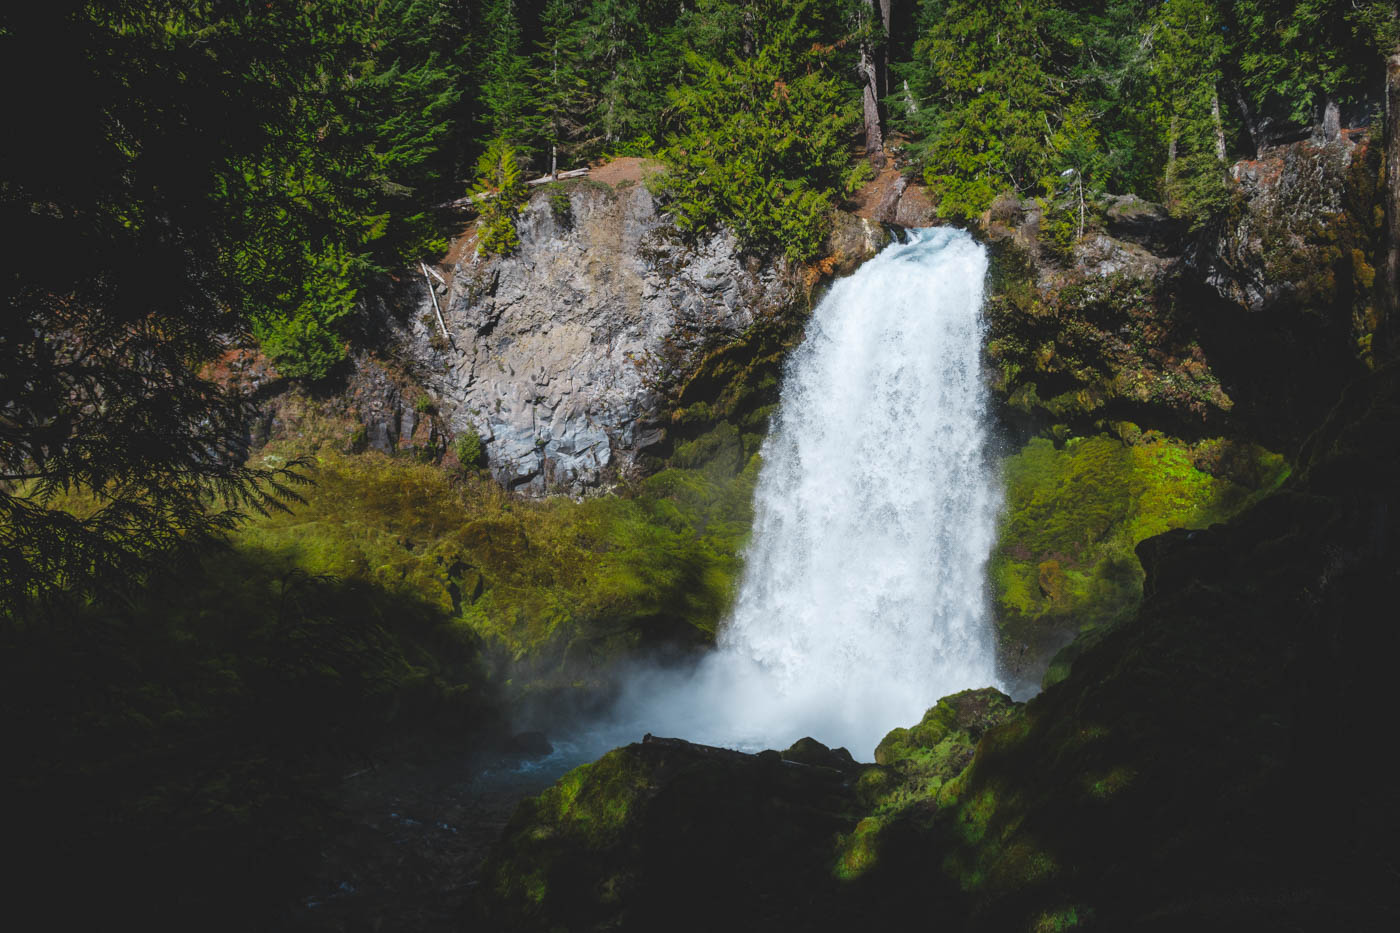 The huge Sahalie Falls flowing from a rock surrounded by the forests of Mt. Hood.